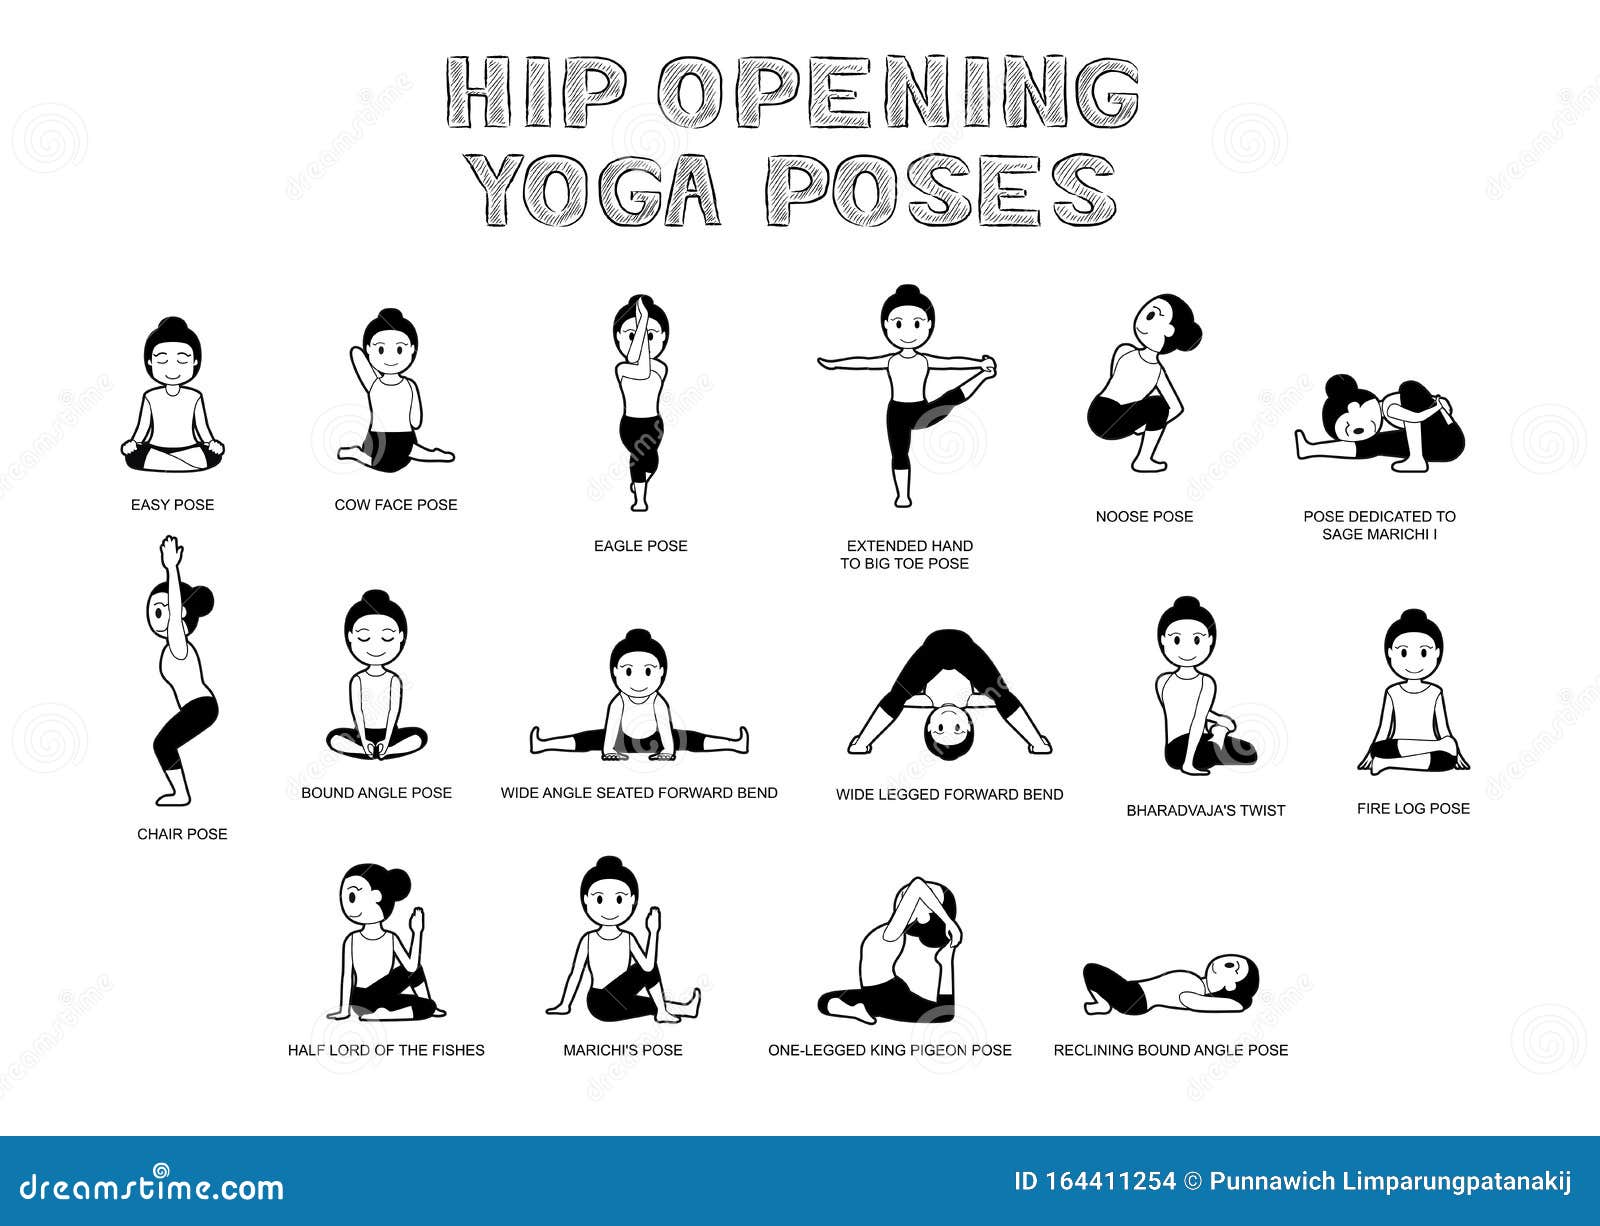 Hip Opening Yoga Poses | Habits of a Modern Hippie